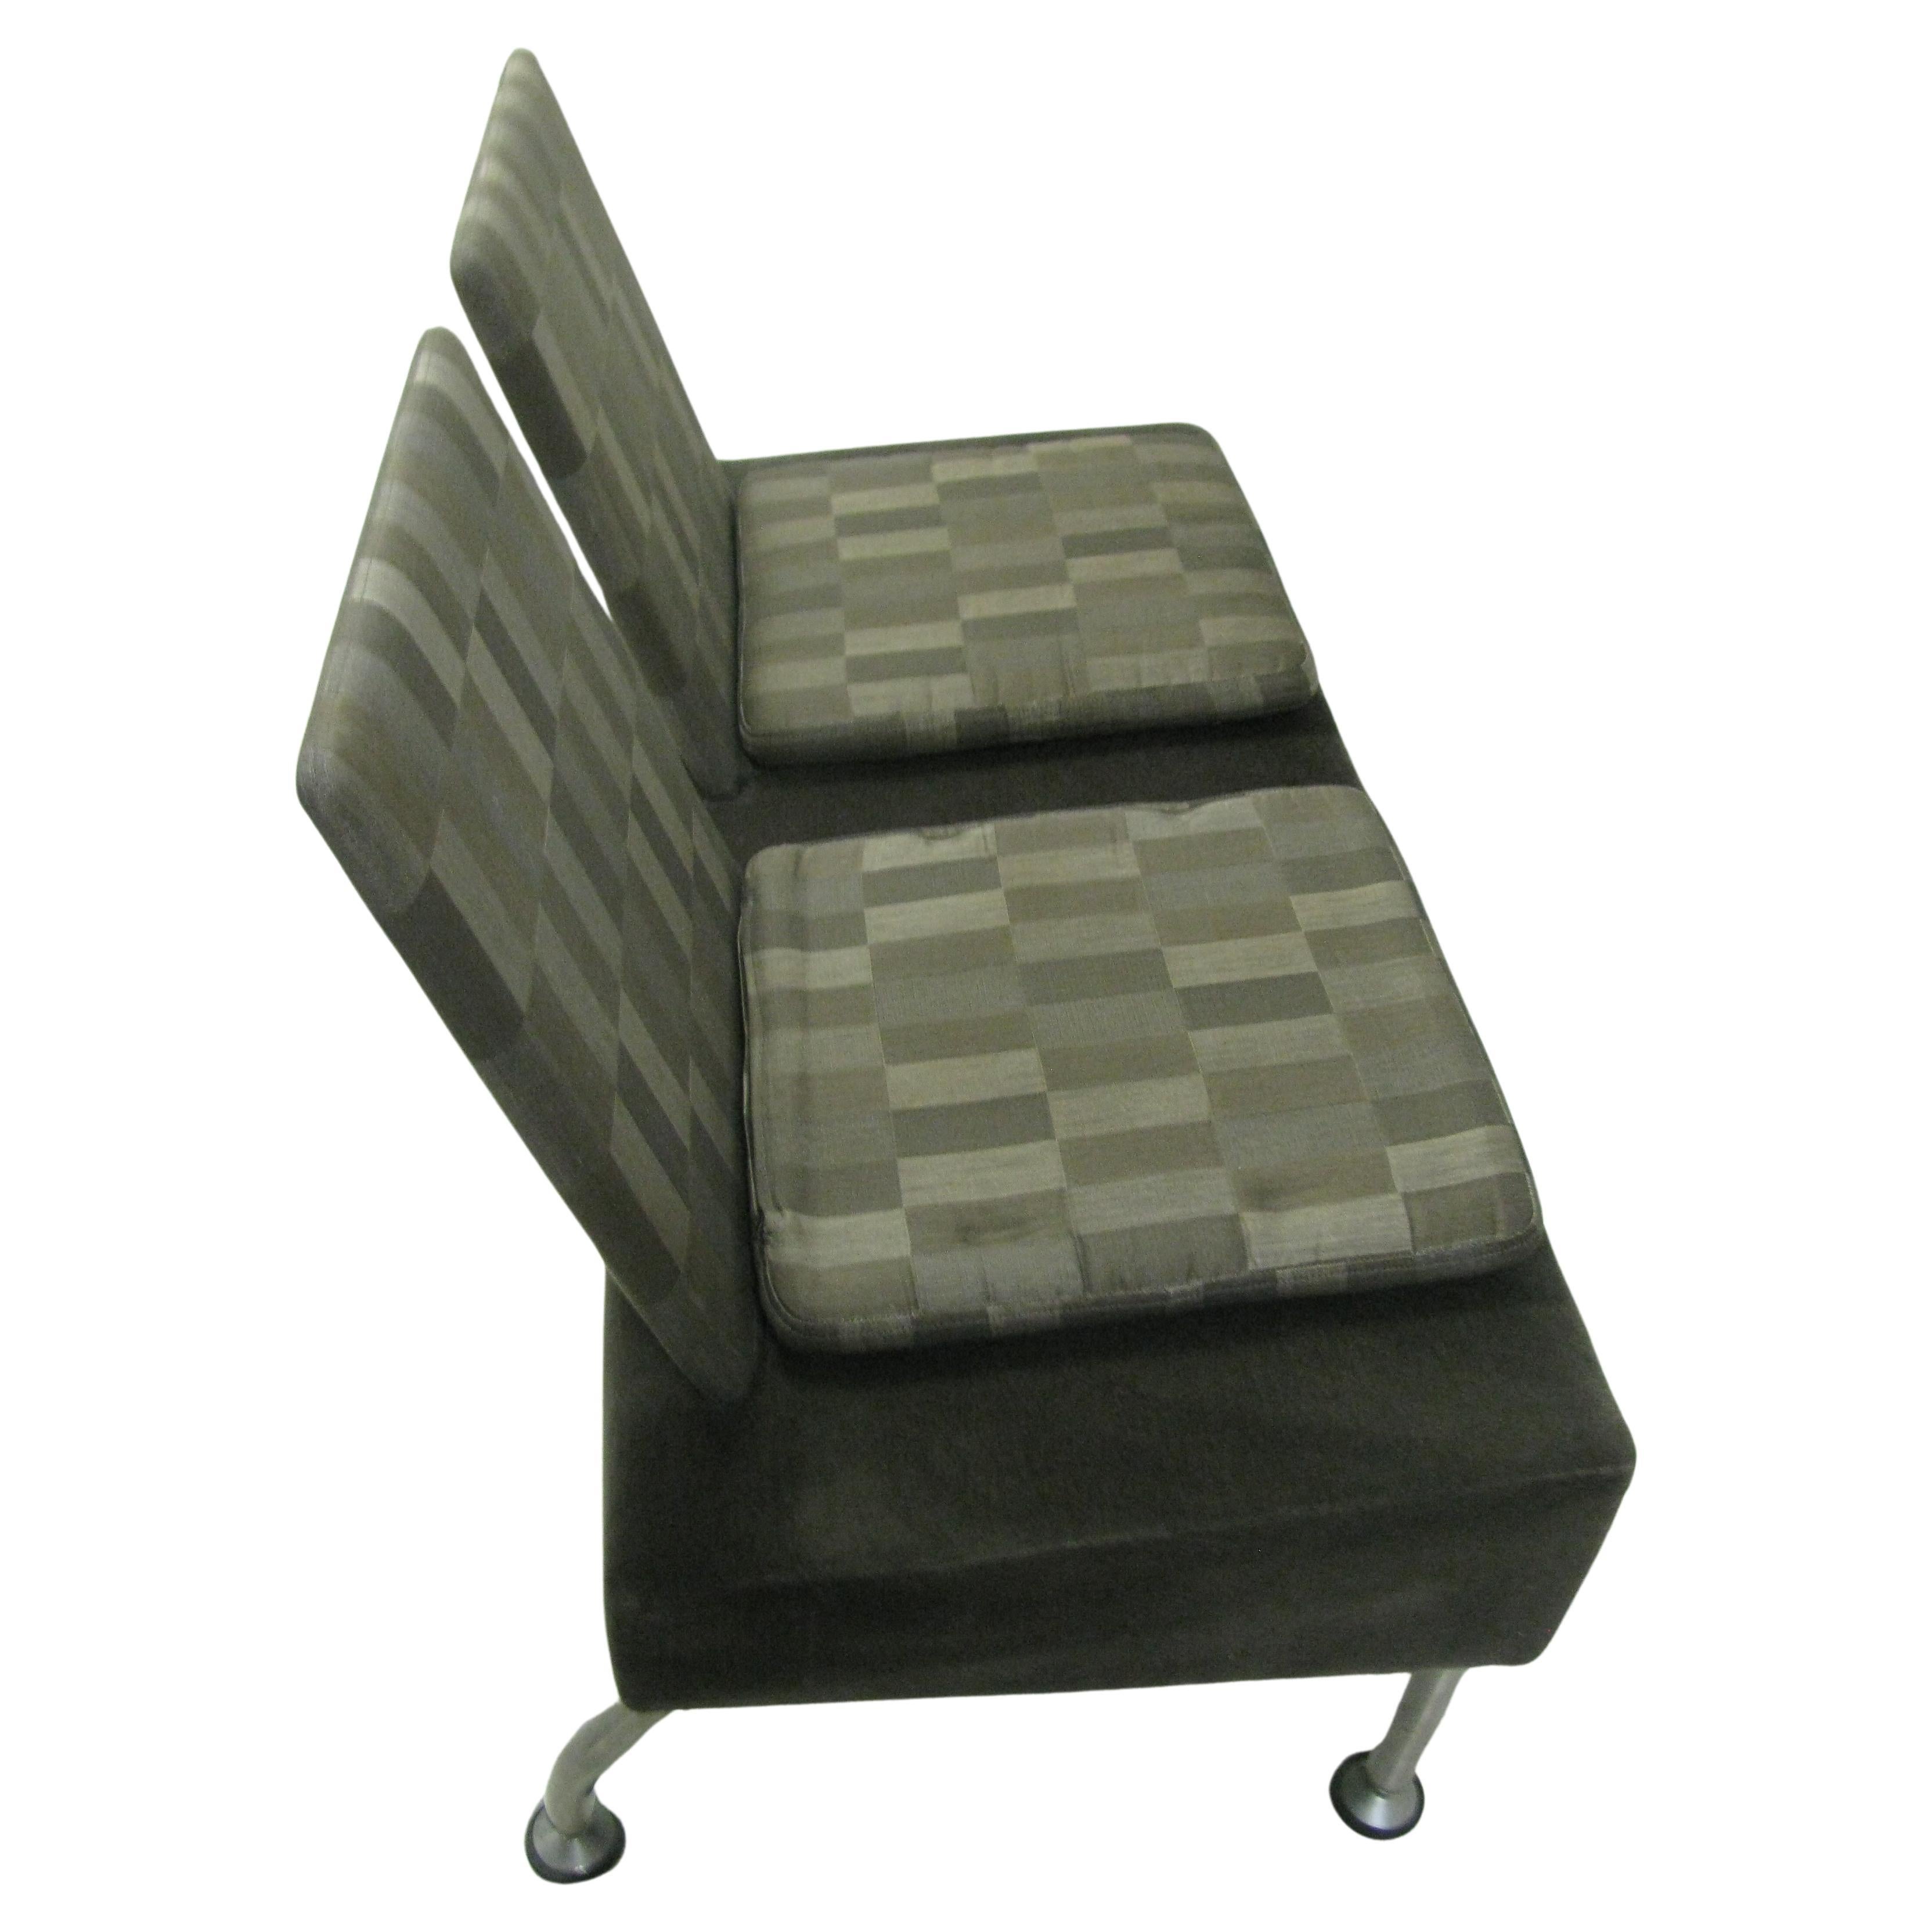 Sleek, simple and well constructed. Base is covered in gray cotton velvet. Seat backs and cushion pads in a gray checker board. Stainless steel legs. Heavy duty construction possibly by Steel case. High quality.